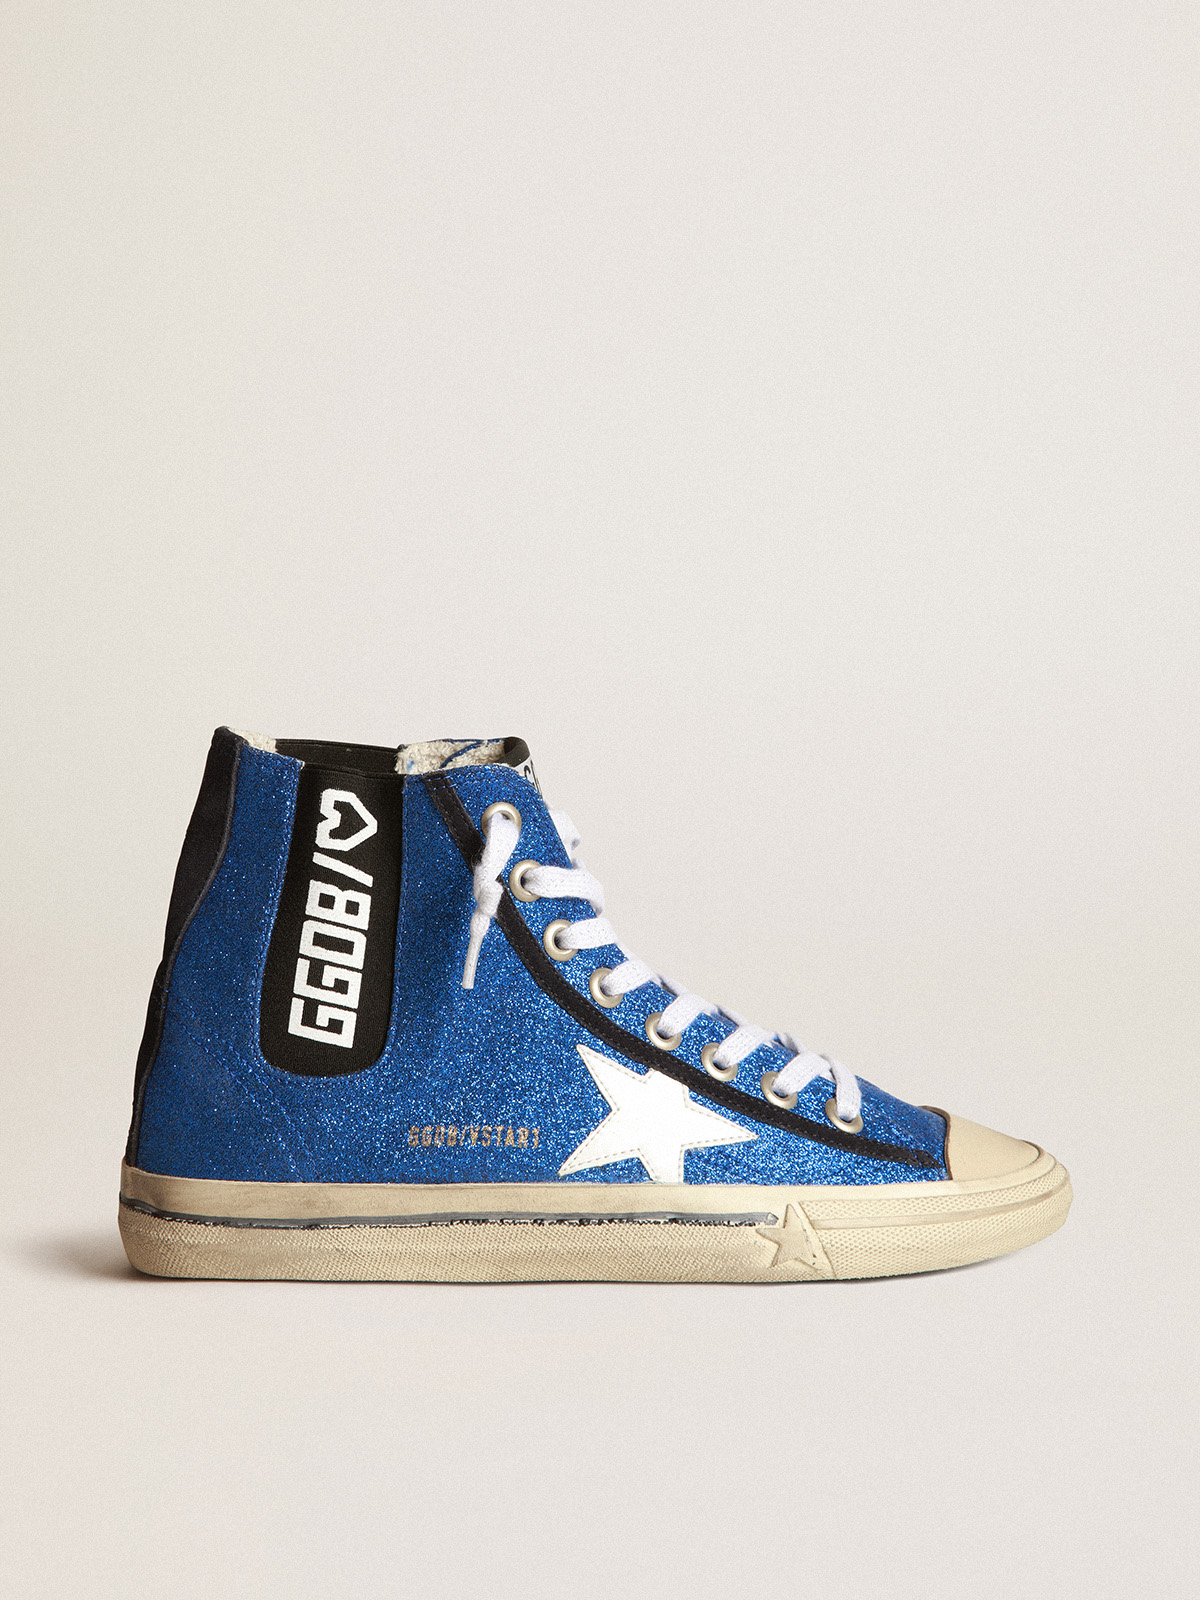 V-Star sneakers in electric blue micro-glitter with white patent leather  star and black elasticated insert | Golden Goose